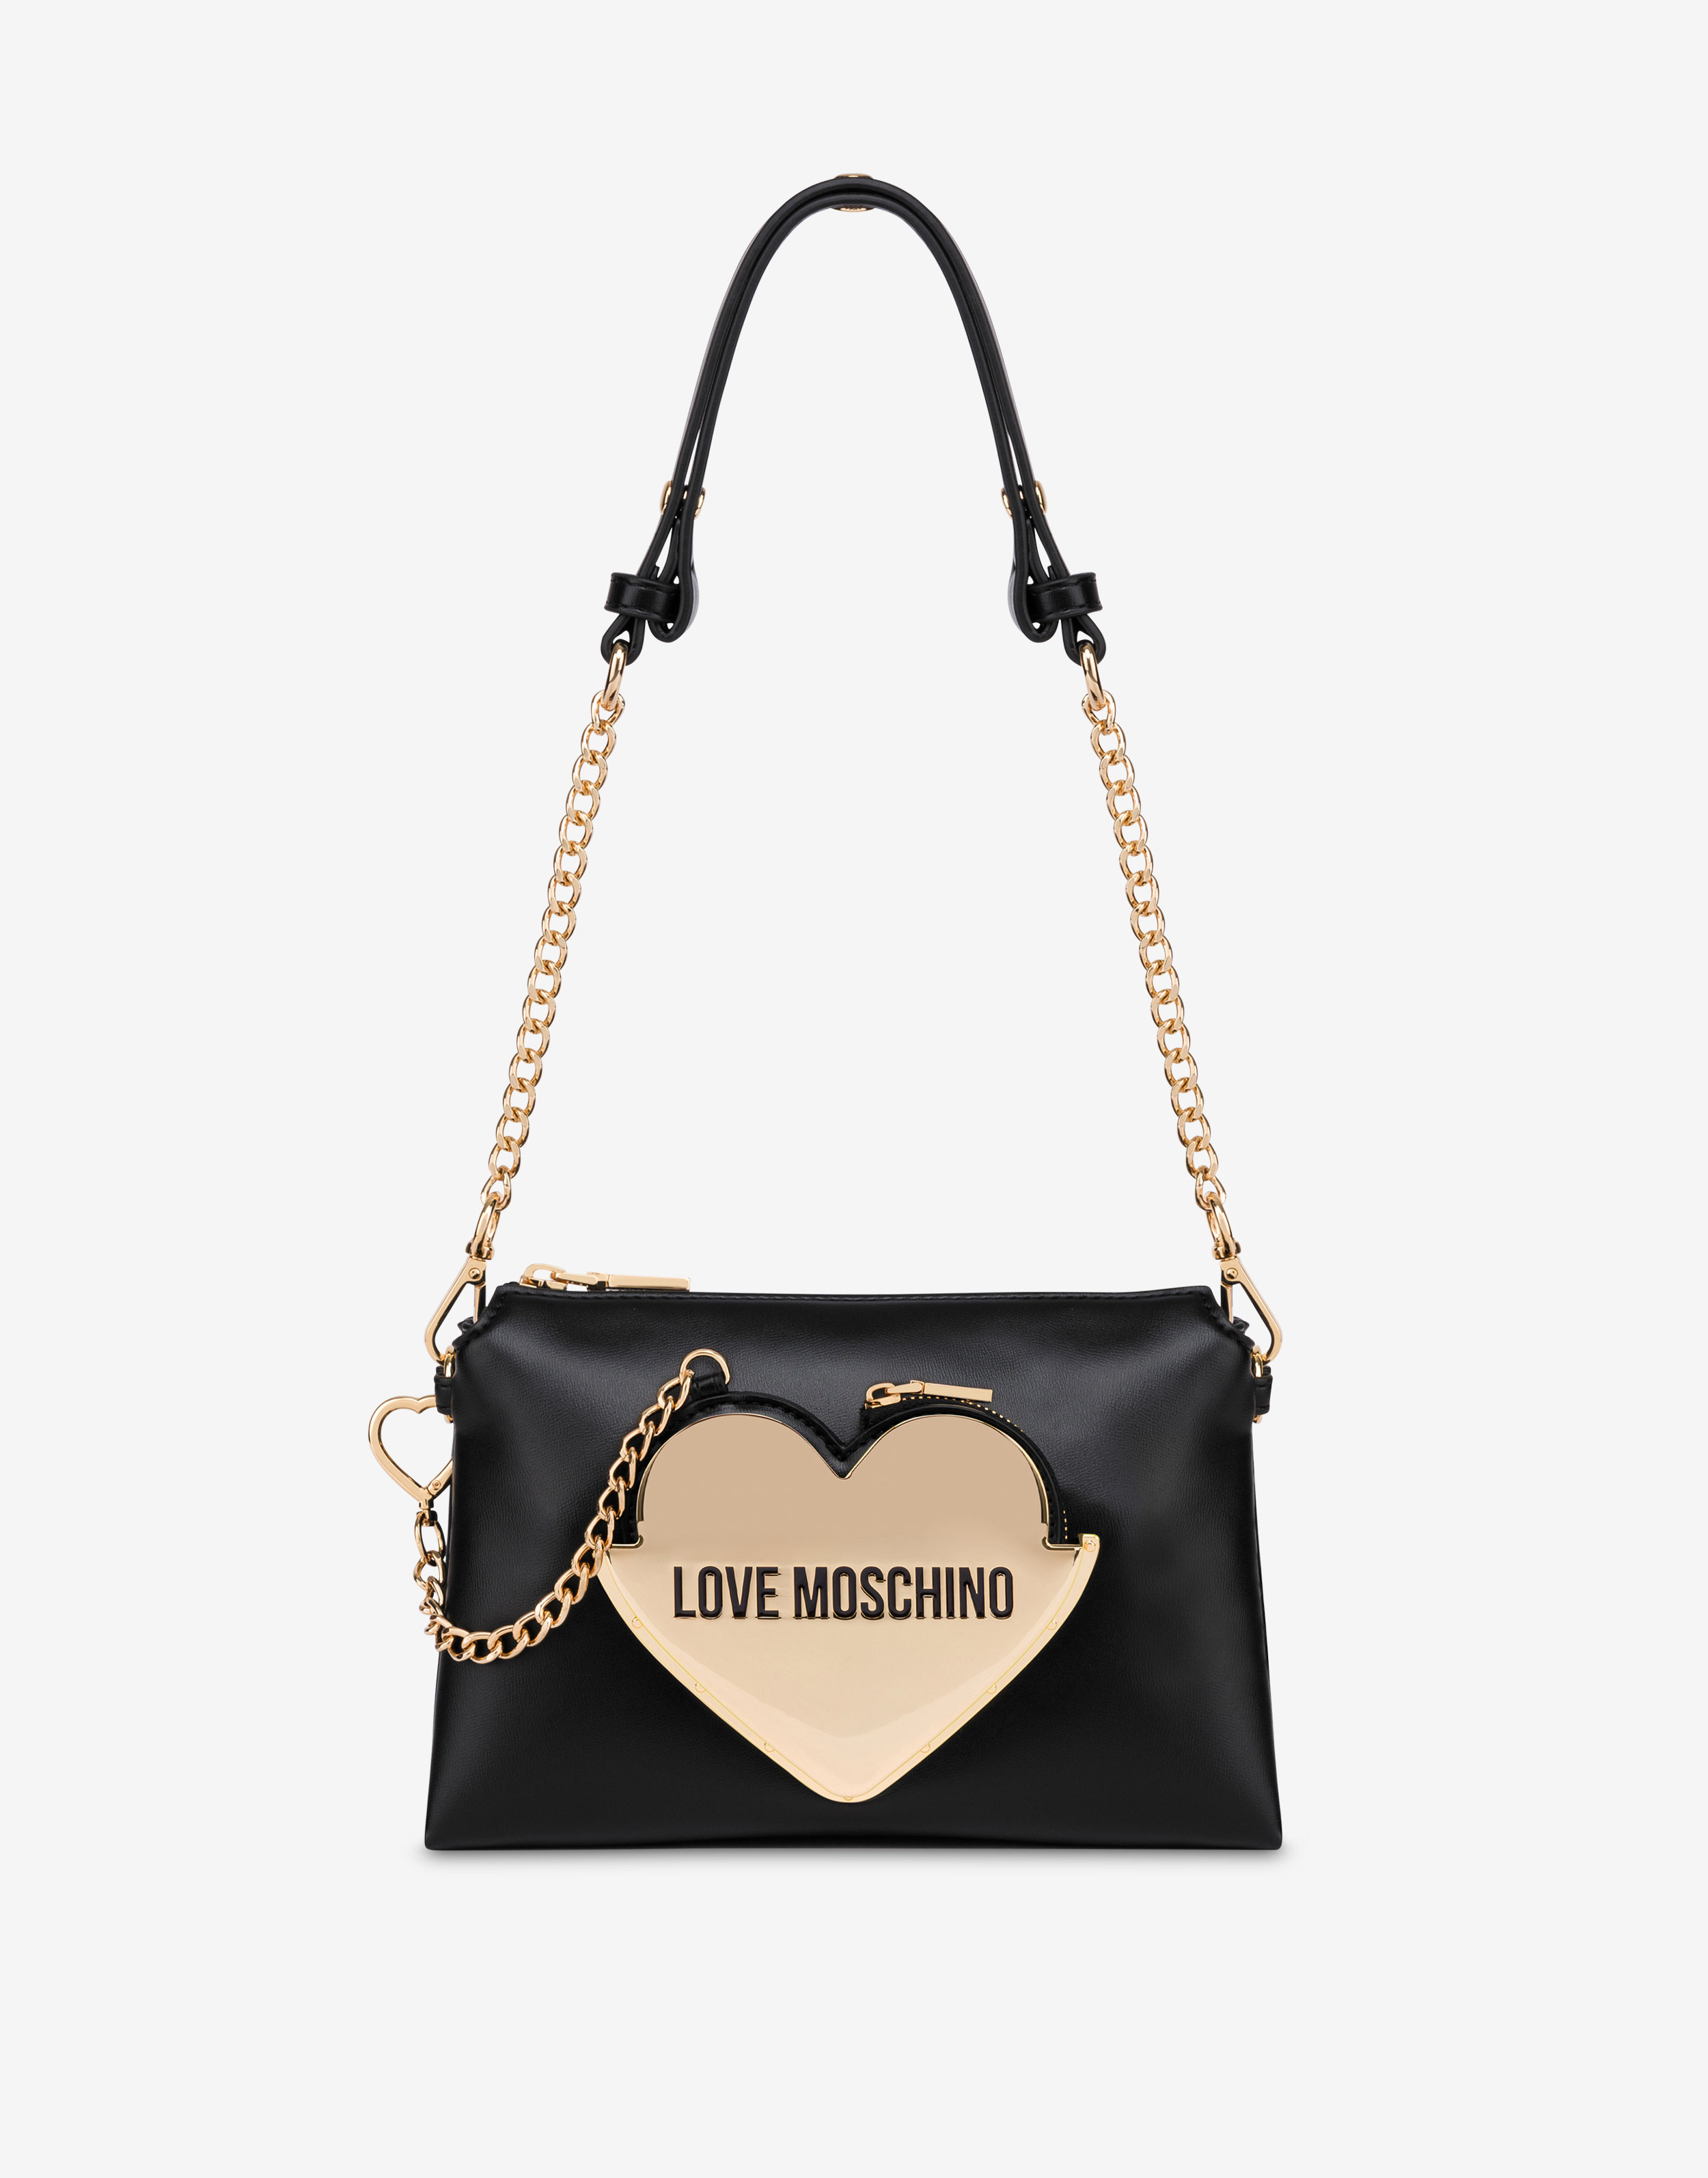 LOVE MOSCHINO: bag in grained synthetic leather - Ivory | LOVE MOSCHINO  handbag JC4112PP1ILJ0 online at GIGLIO.COM